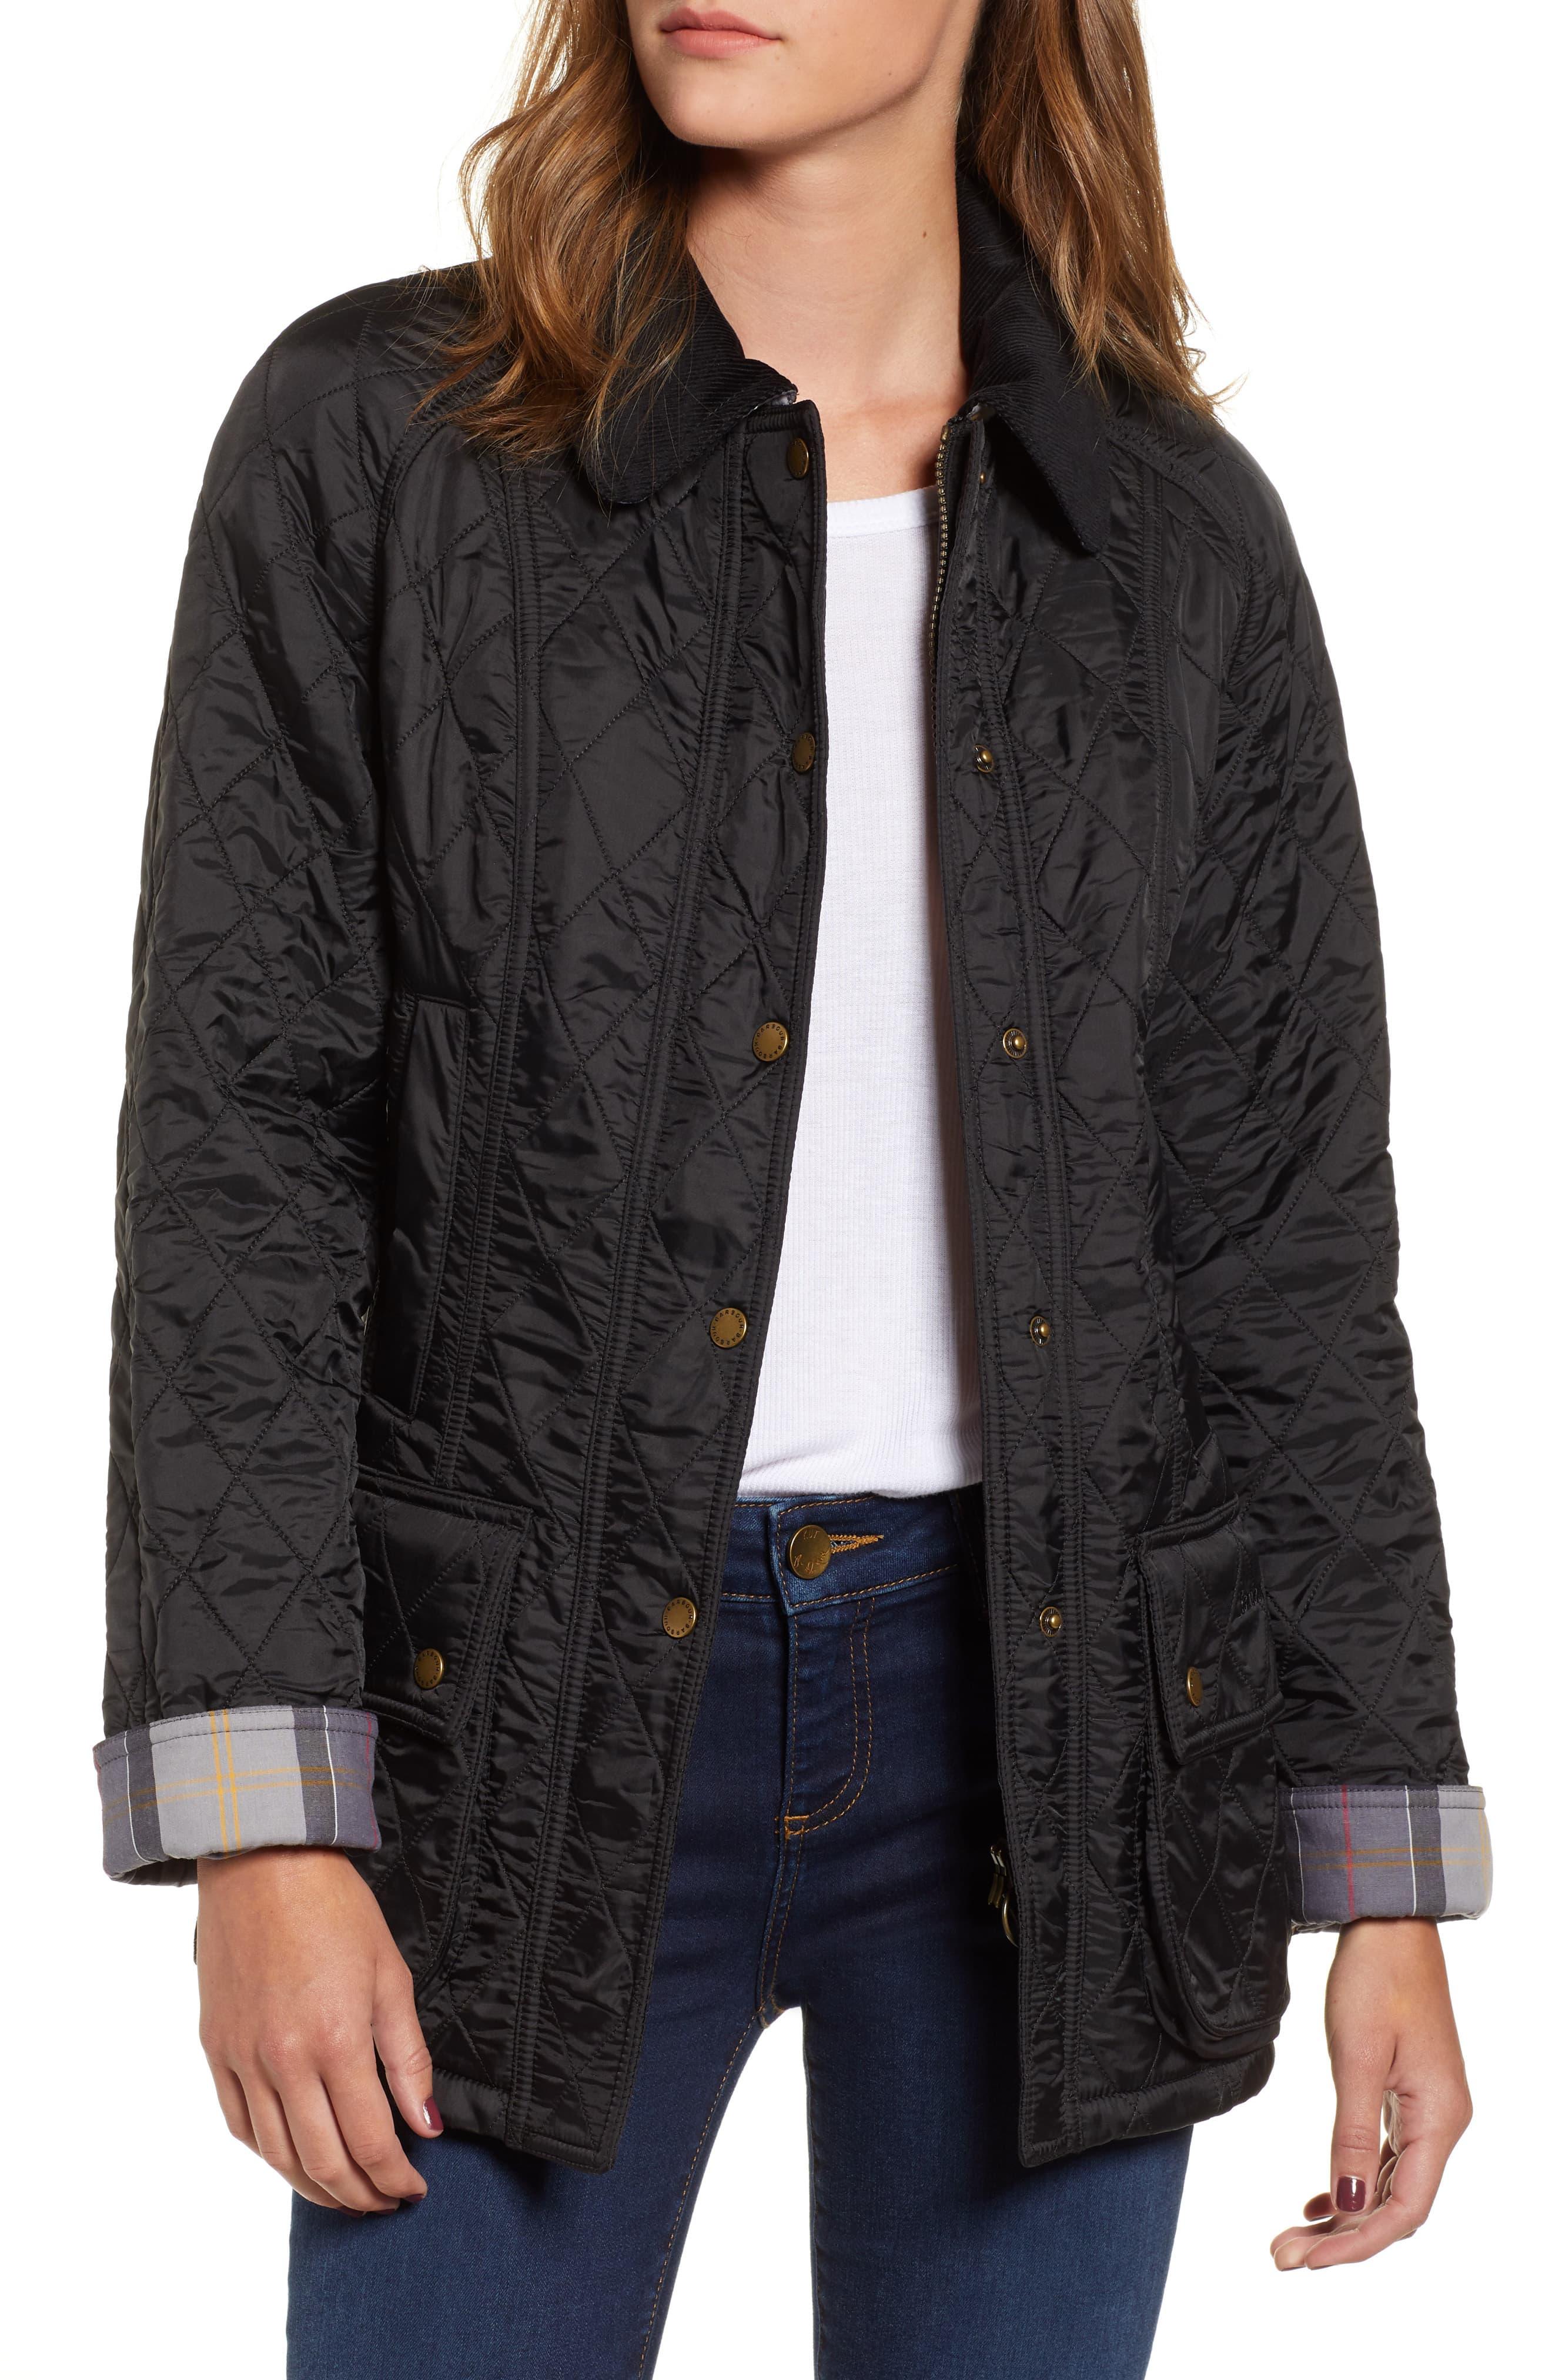 Barbour Corduroy 'Beadnell' Quilted Jacket in Black/ Black (Black) - Lyst